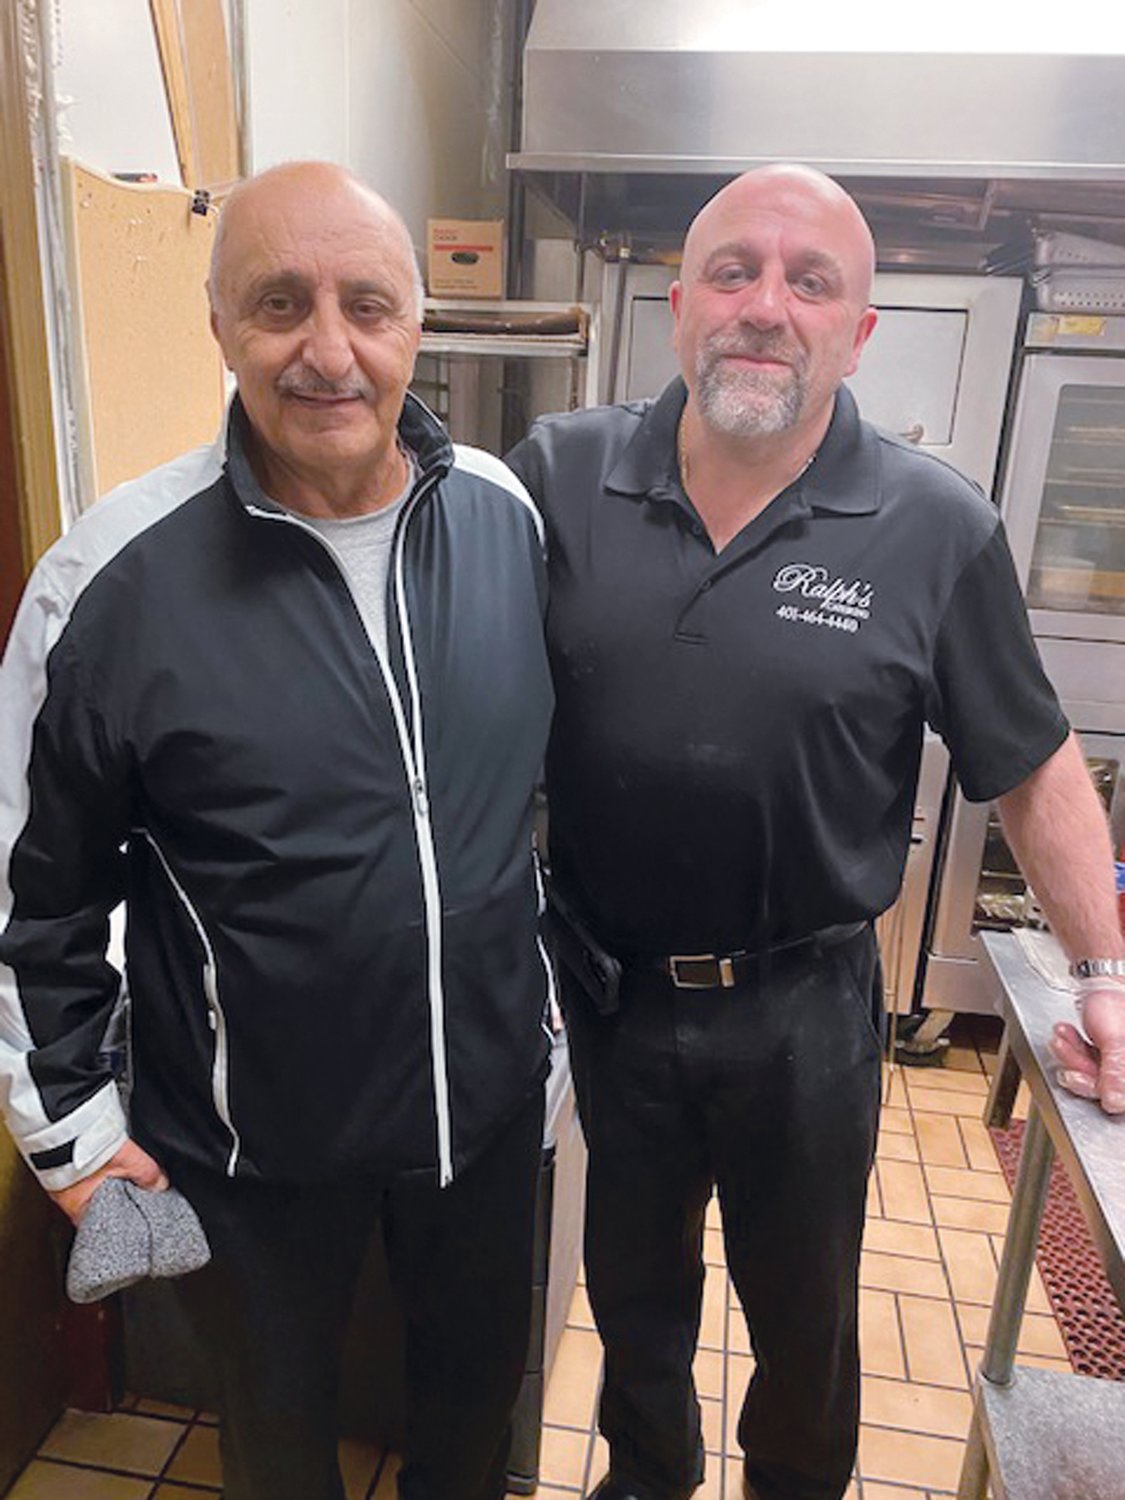 FUNDRAISING FRIENDS: Vin LaFazia (left), who has been a co-chairperson for many previous Ricky Salzillo Memorial Game Dinners, is joined by Ralph DeFusco of Ralph’s Kitchen and Catering fame who will prepare and cook this year’s food fest inside the Santa Maria DePrate Hall in Cranston.